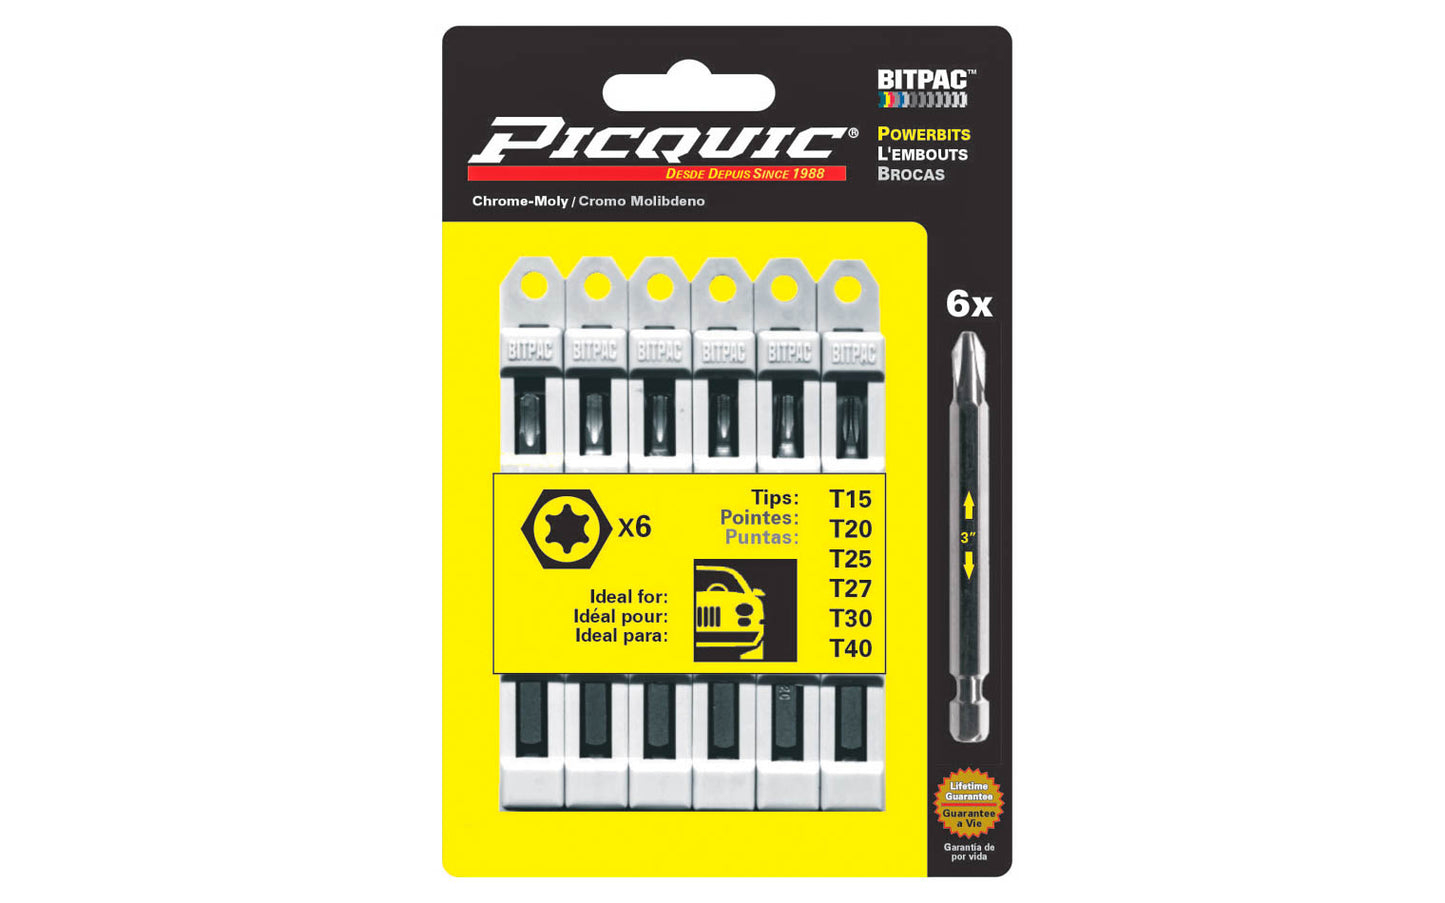 Picquic 6-piece Torx Powerbit Set with sizes T-15, T-20, T-25, T-27, T-30, T-40  Torx drive bits. Replacement bits for Picquic screwdrivers & also good for use in drills & impact drivers. 1/4” hex ball power shank. 057369950033